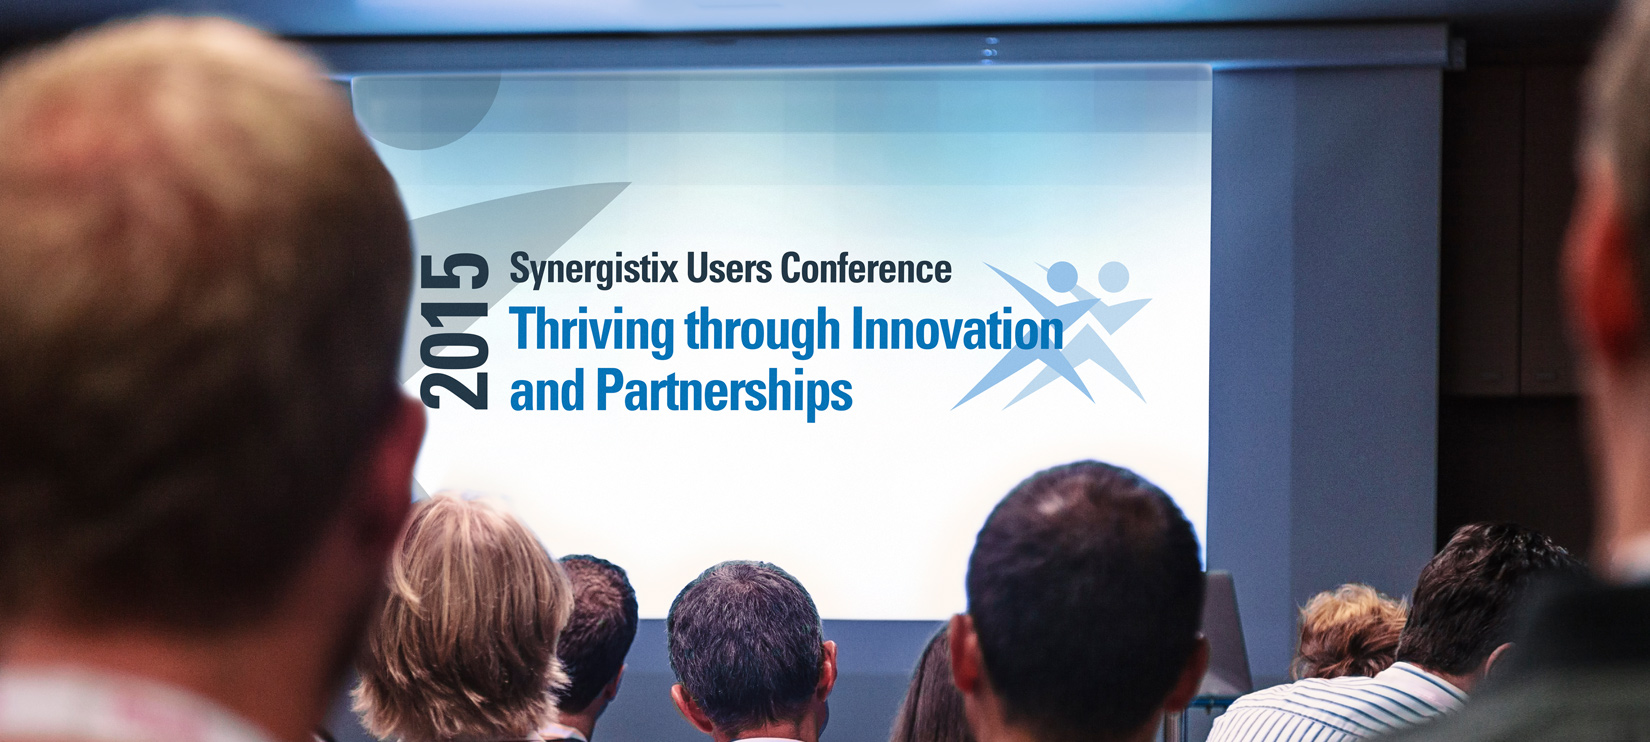 Synergistix Users Conference presentation